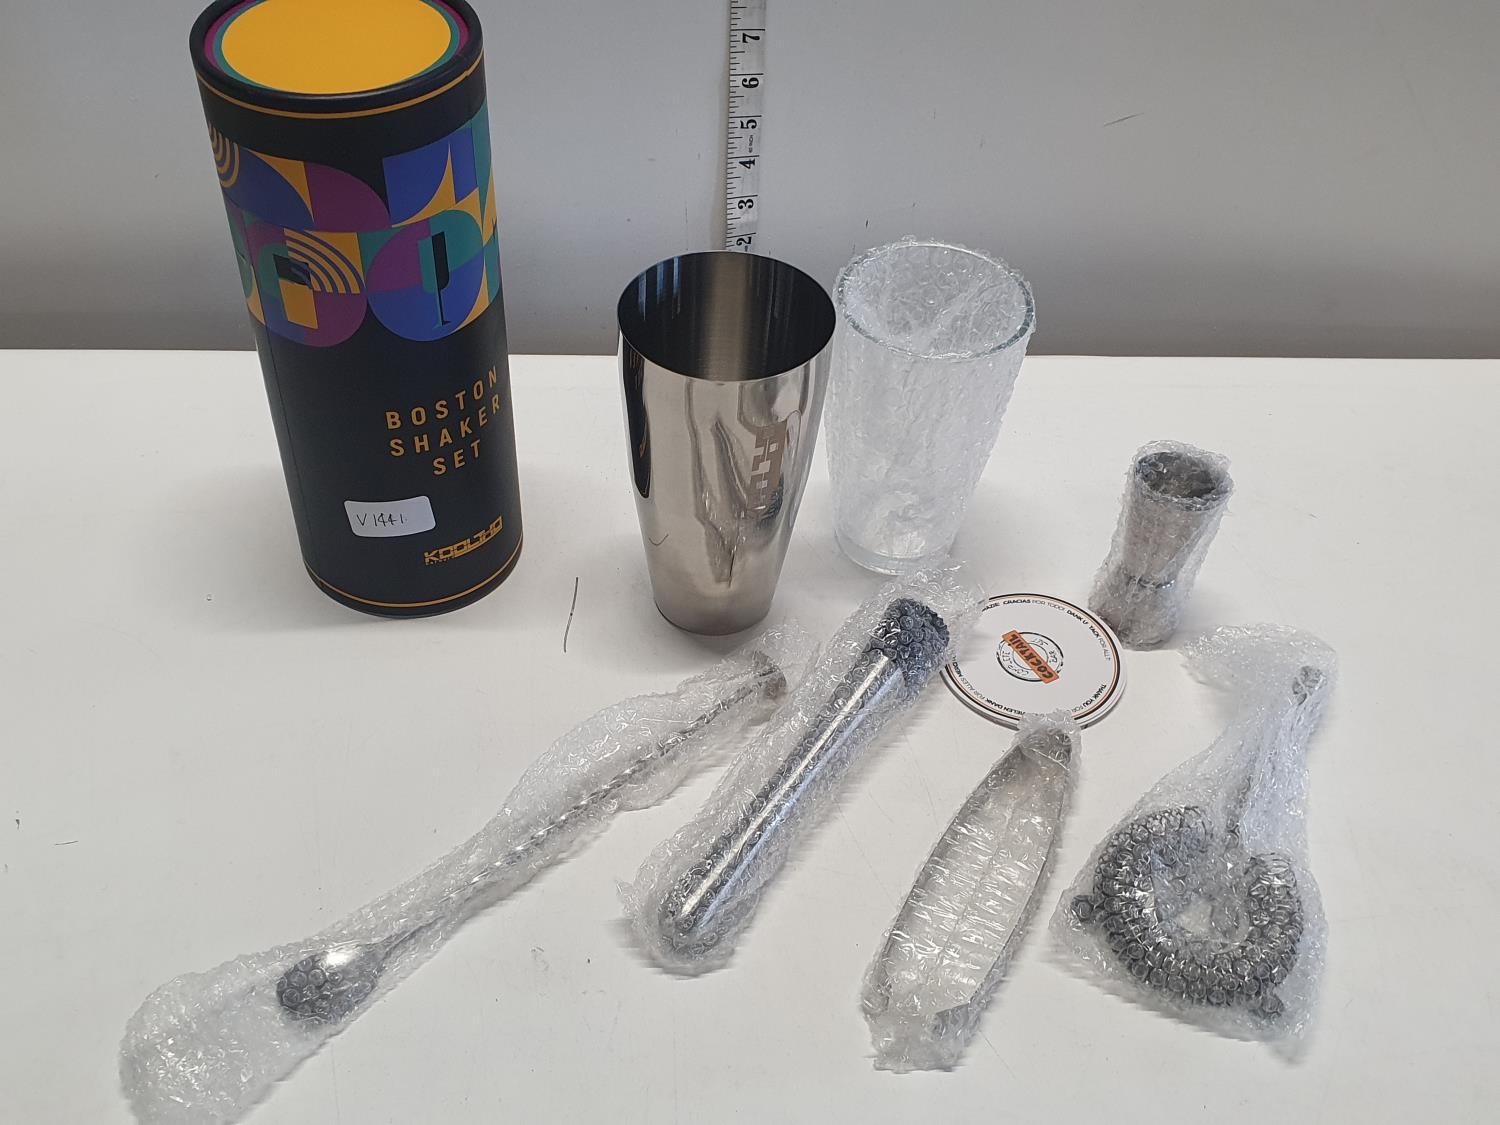 A box of new cocktail shaker set